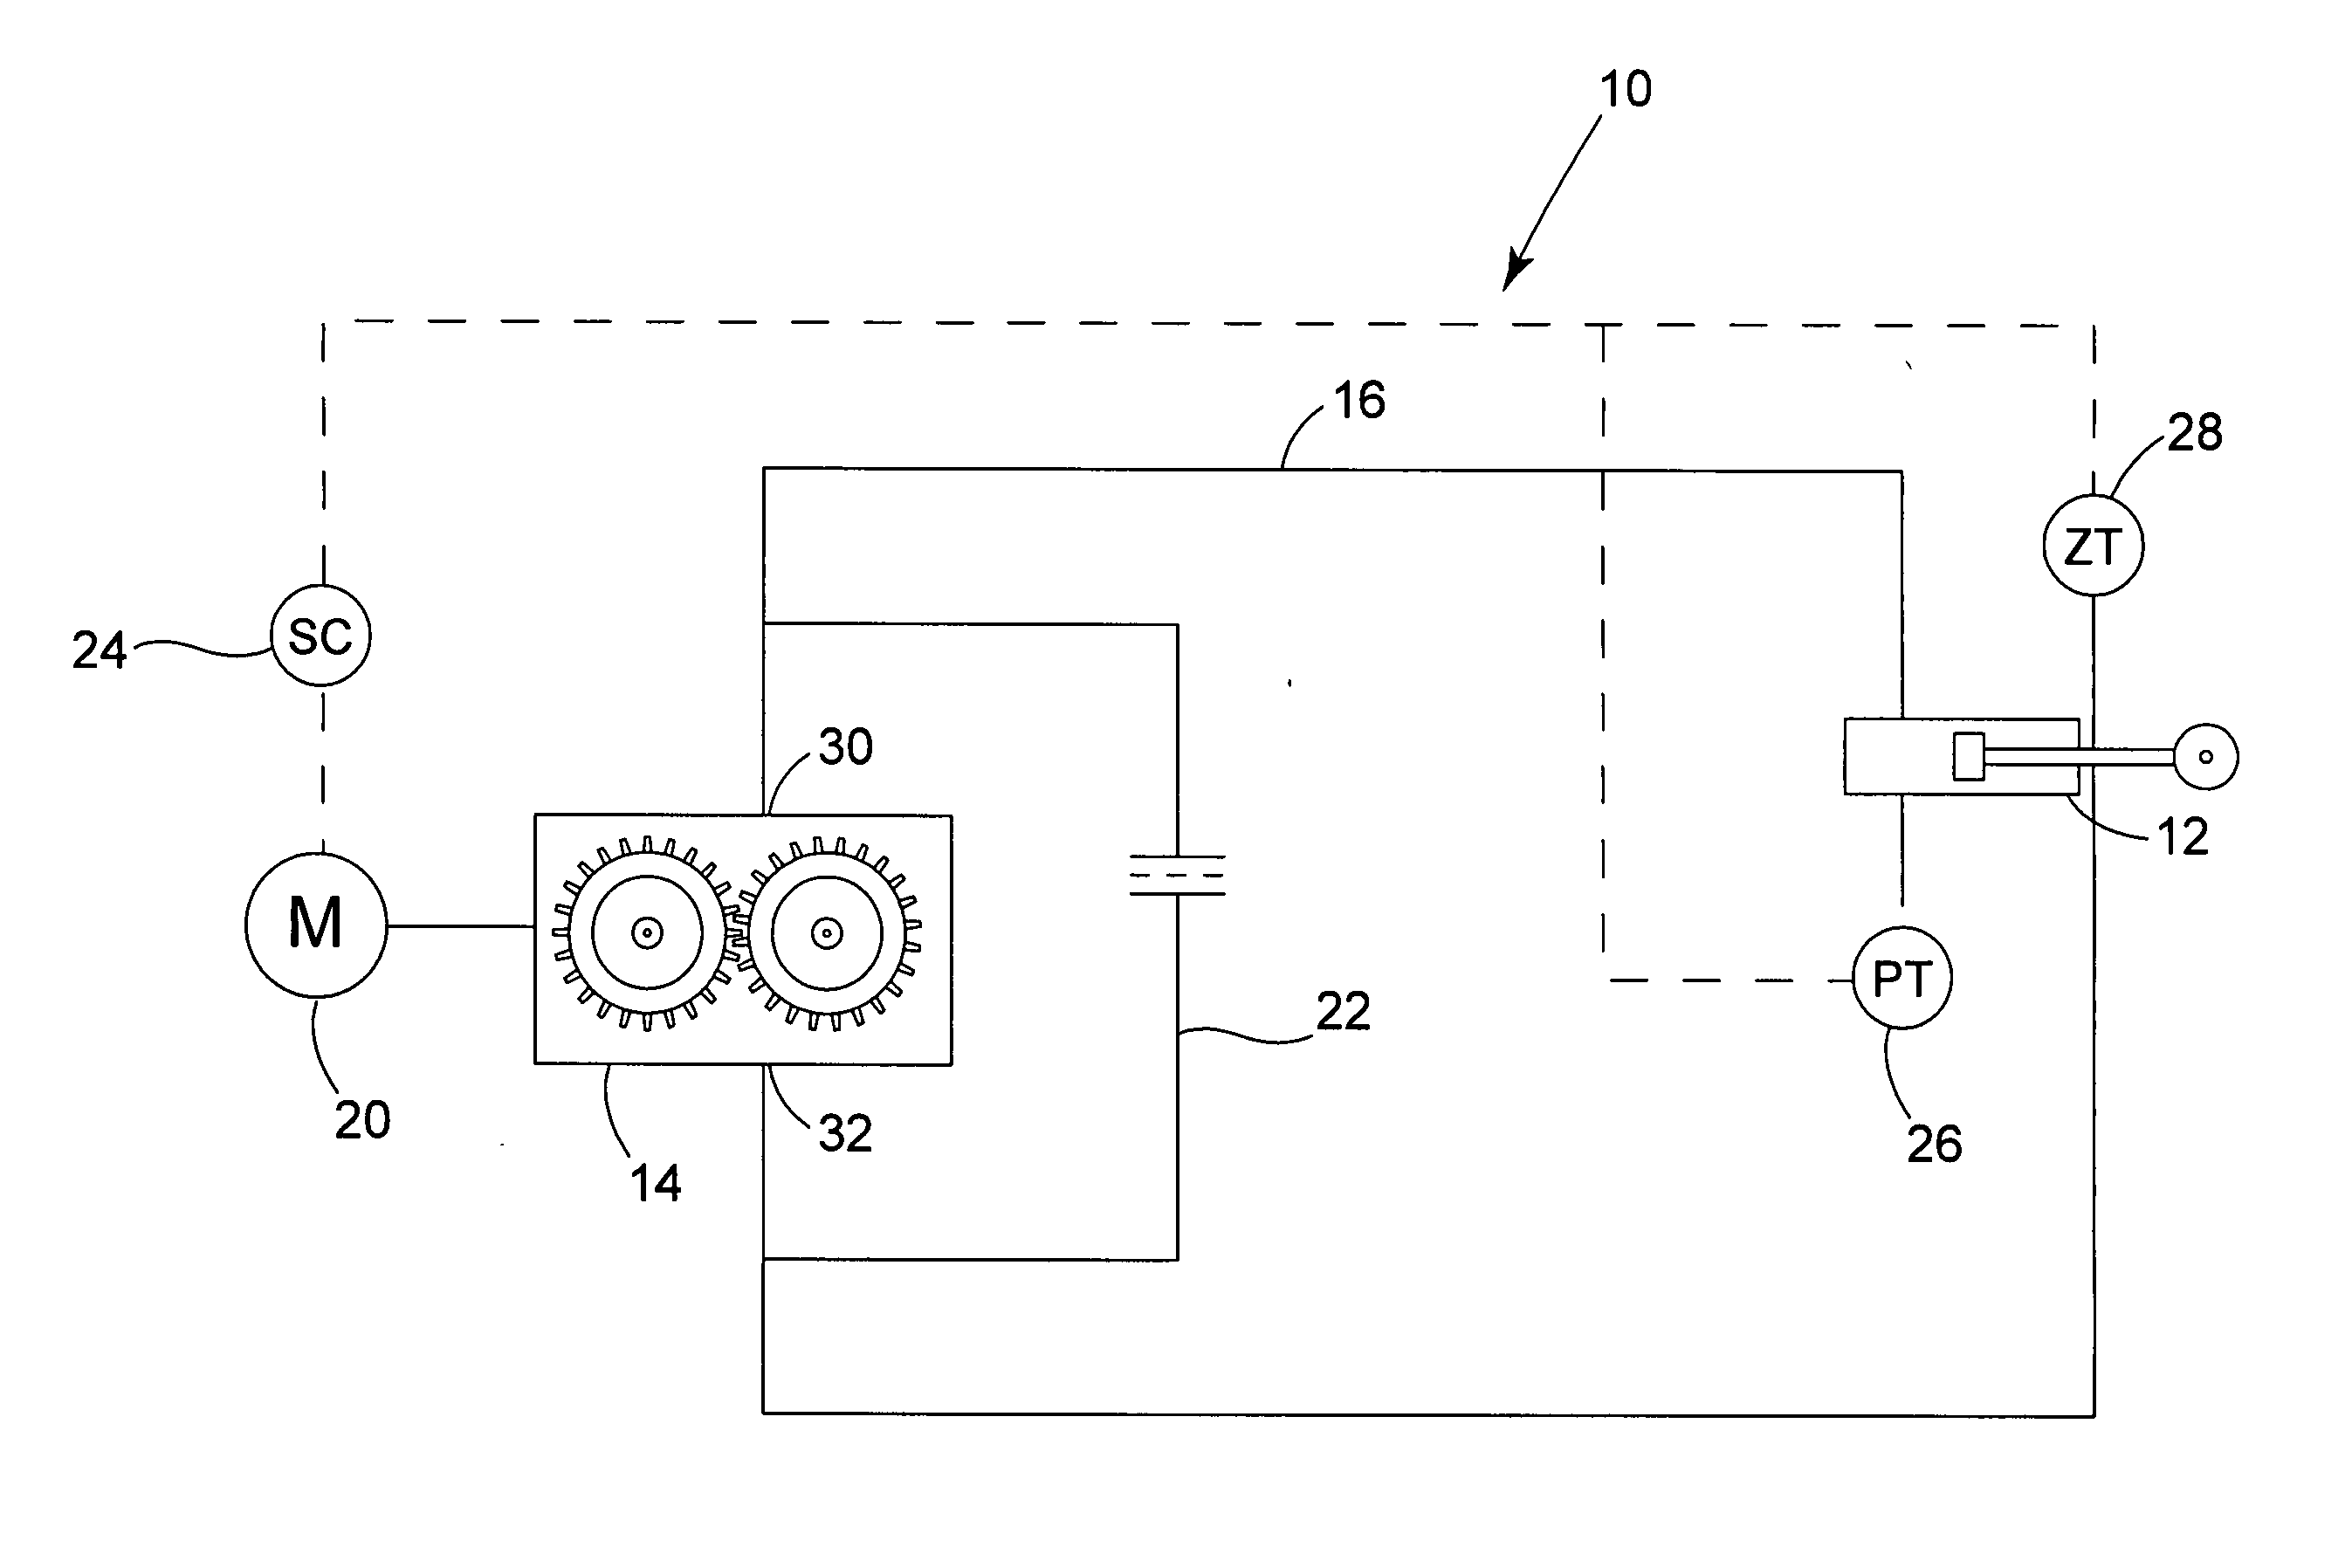 Servo-motor controlled hydraulic press, hydraulic actuator, and methods of positioning various devices